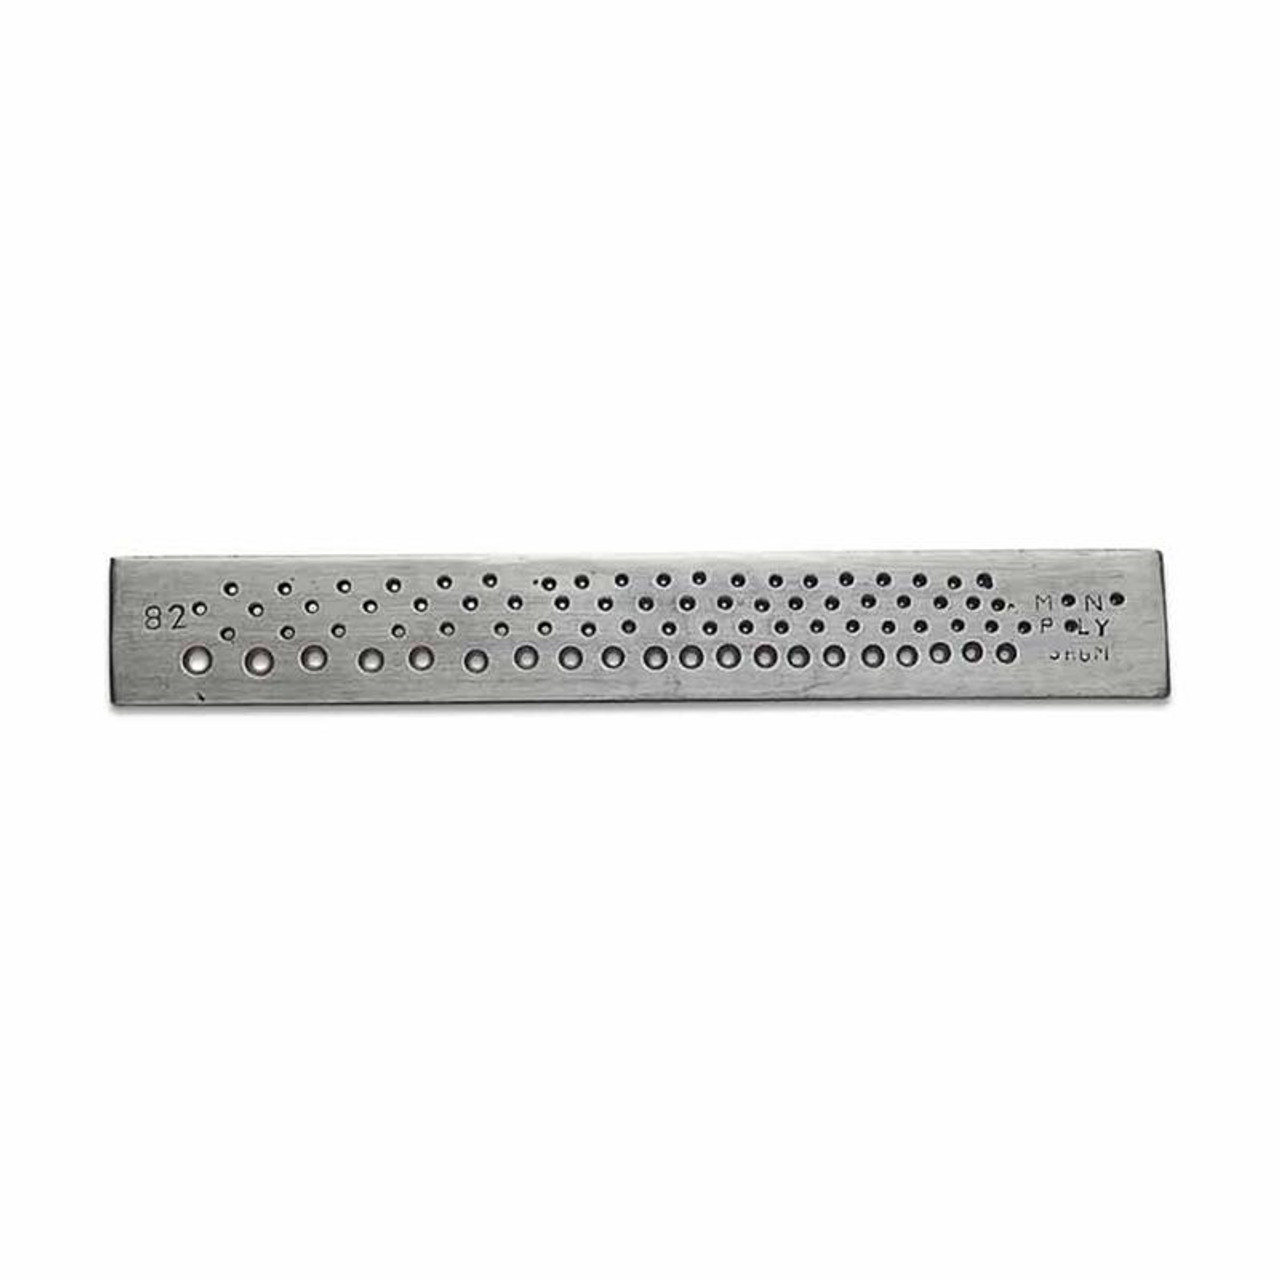 Economy Steel Drawplate with 82 Holes for Jewelry or Watchmaking